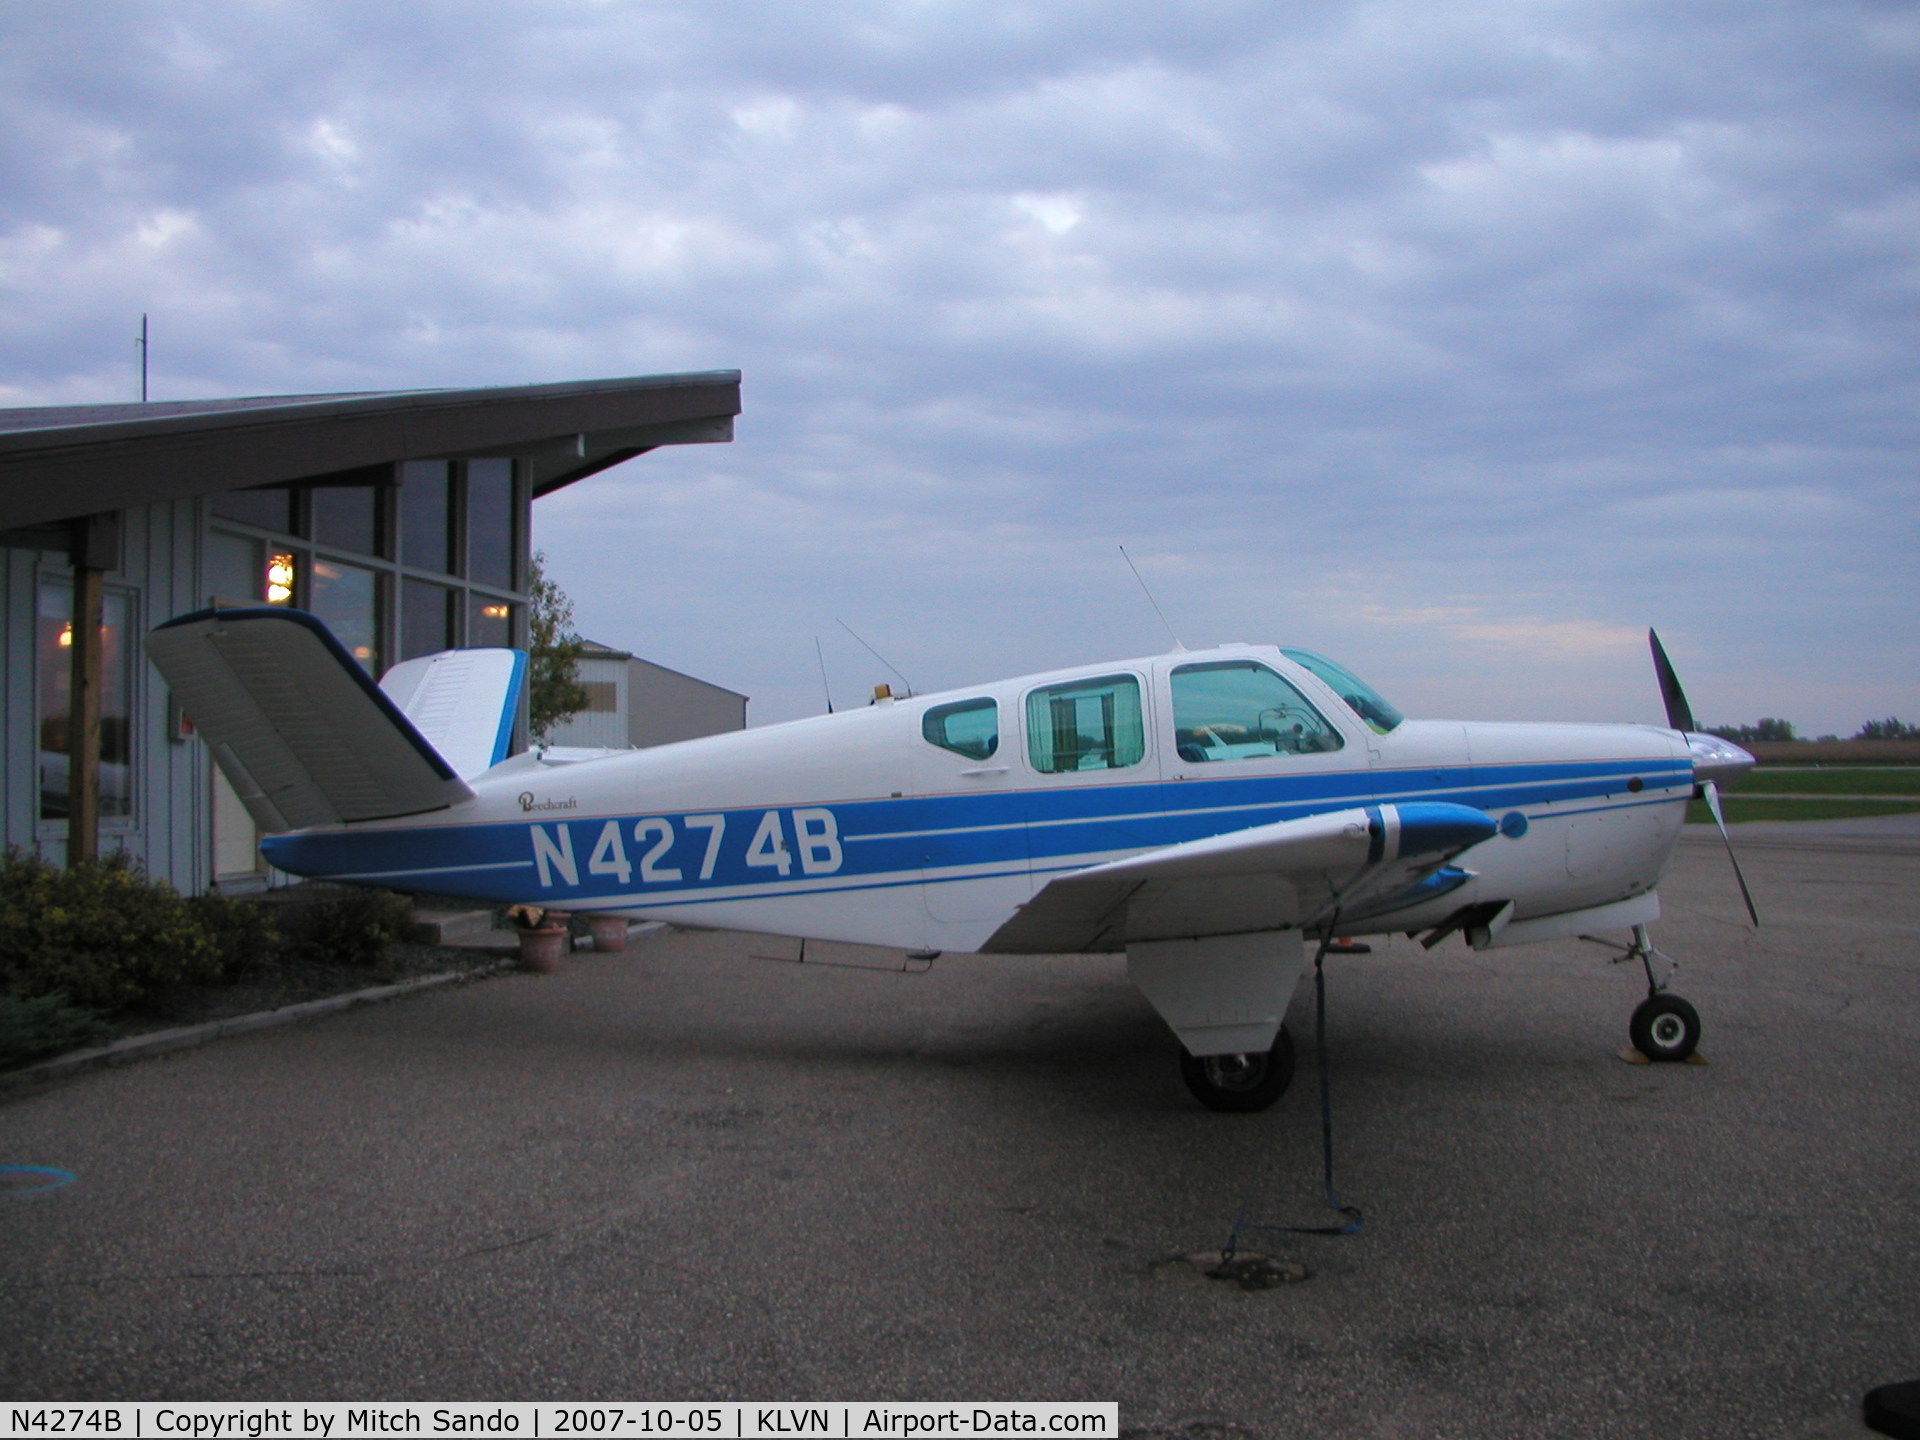 N4274B, 1955 Beech F35 Bonanza C/N D-4341, Parked on the ramp after a flight from Grand Forks, ND (GFK).